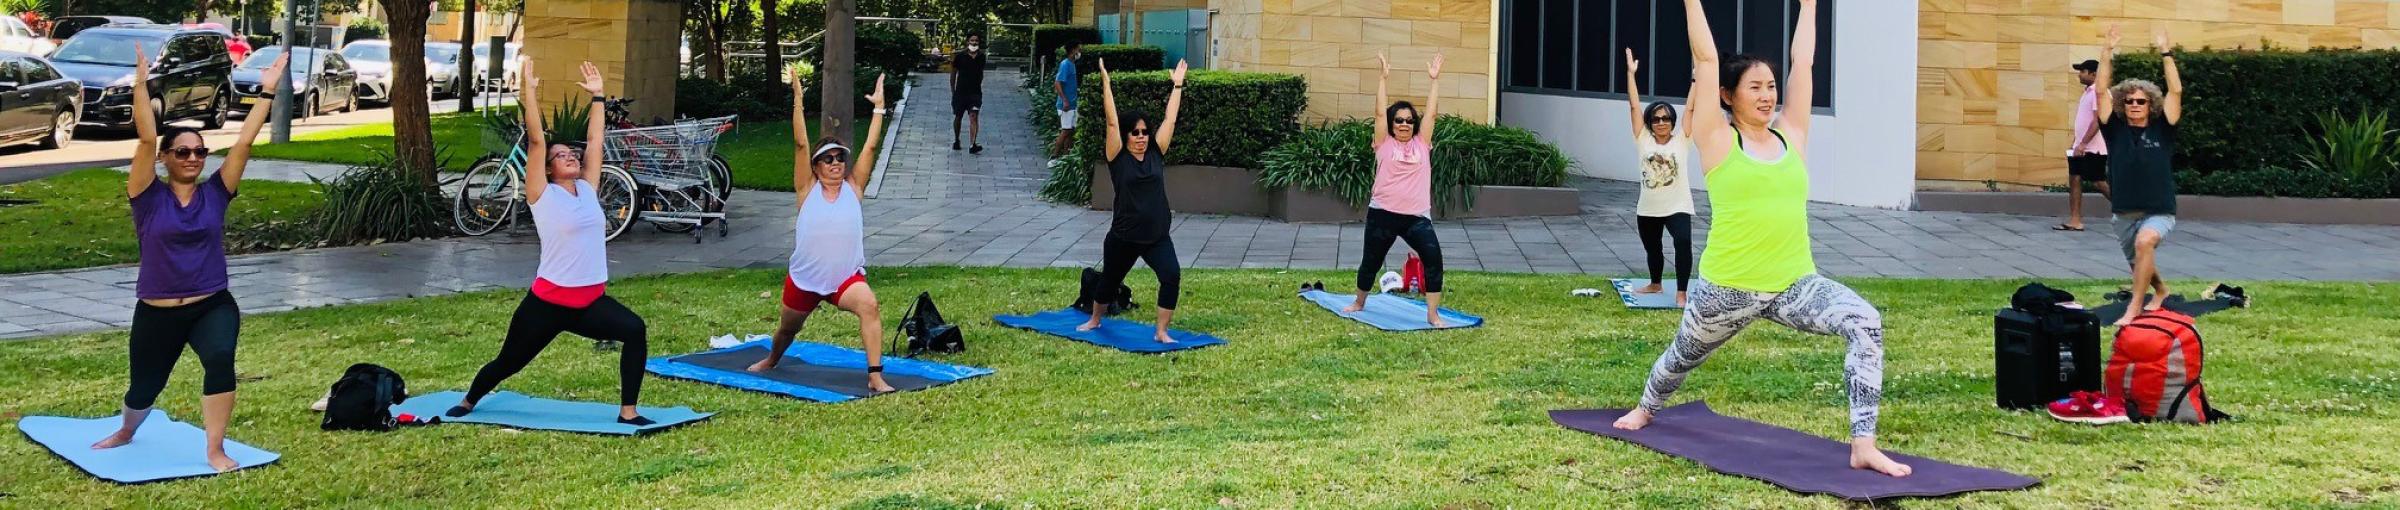 group yoga in park